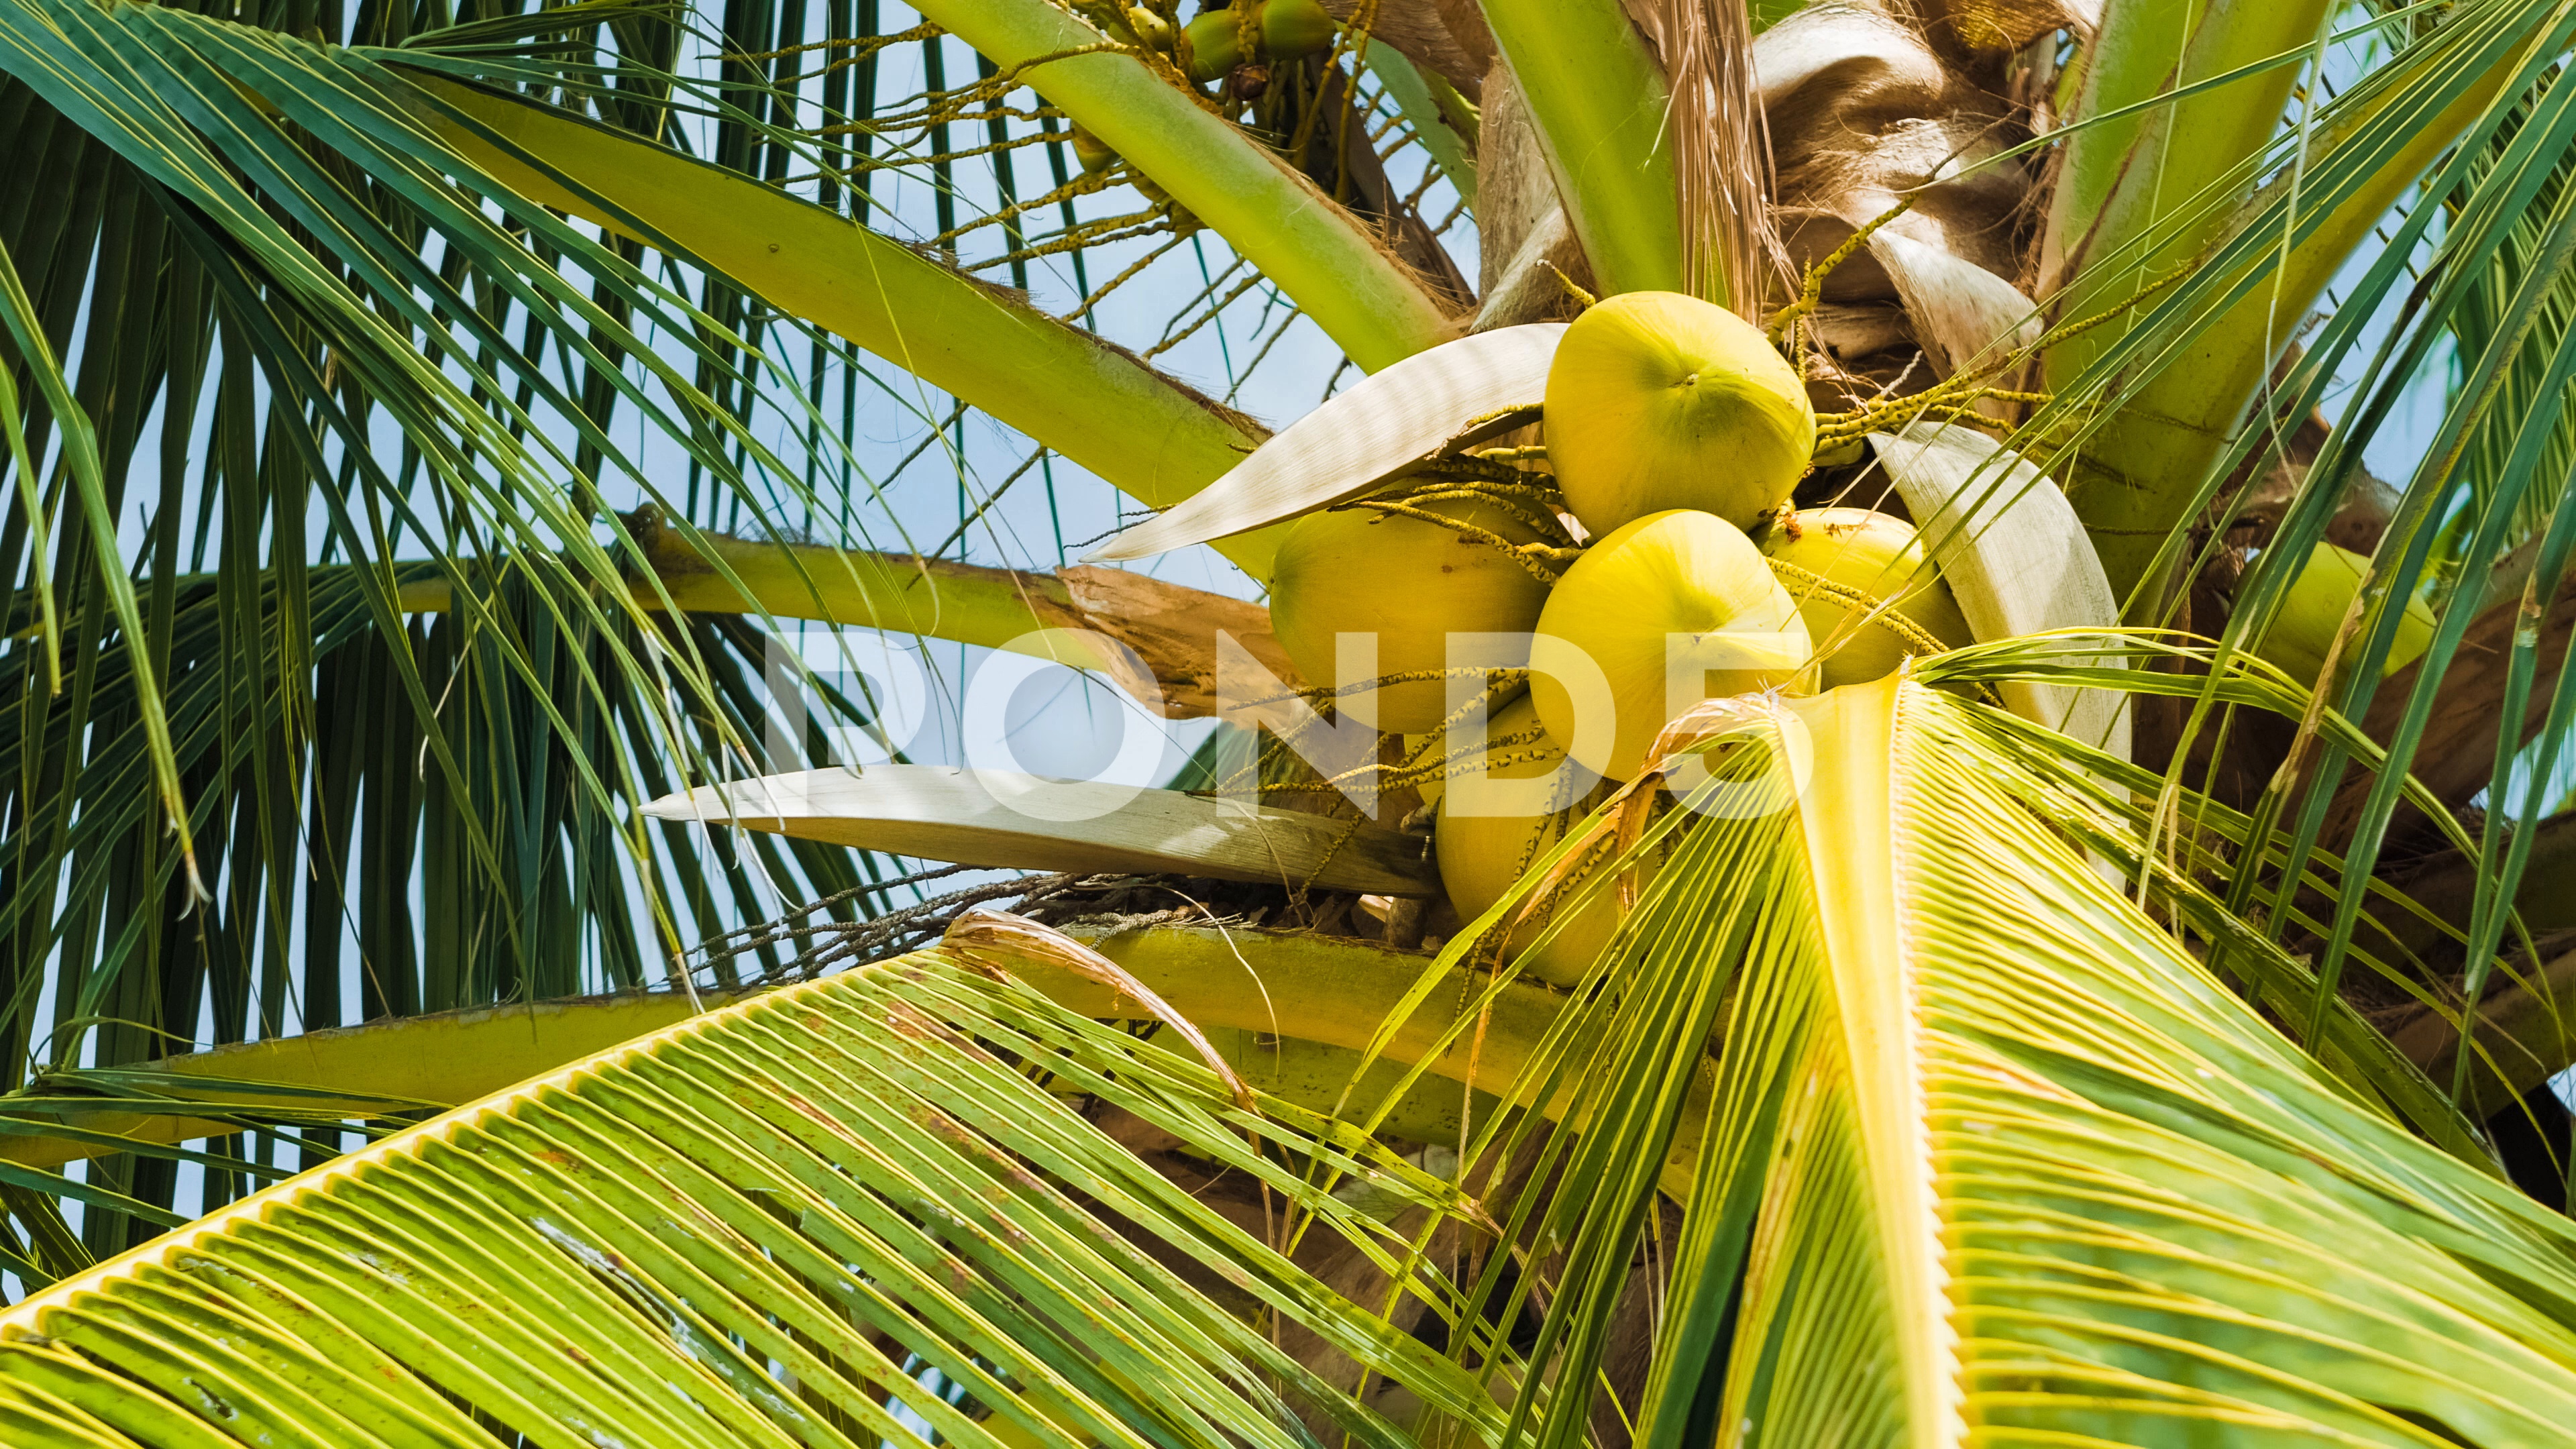 Bottom view of a coconut bunch on an palm tree in sunny dally light ...